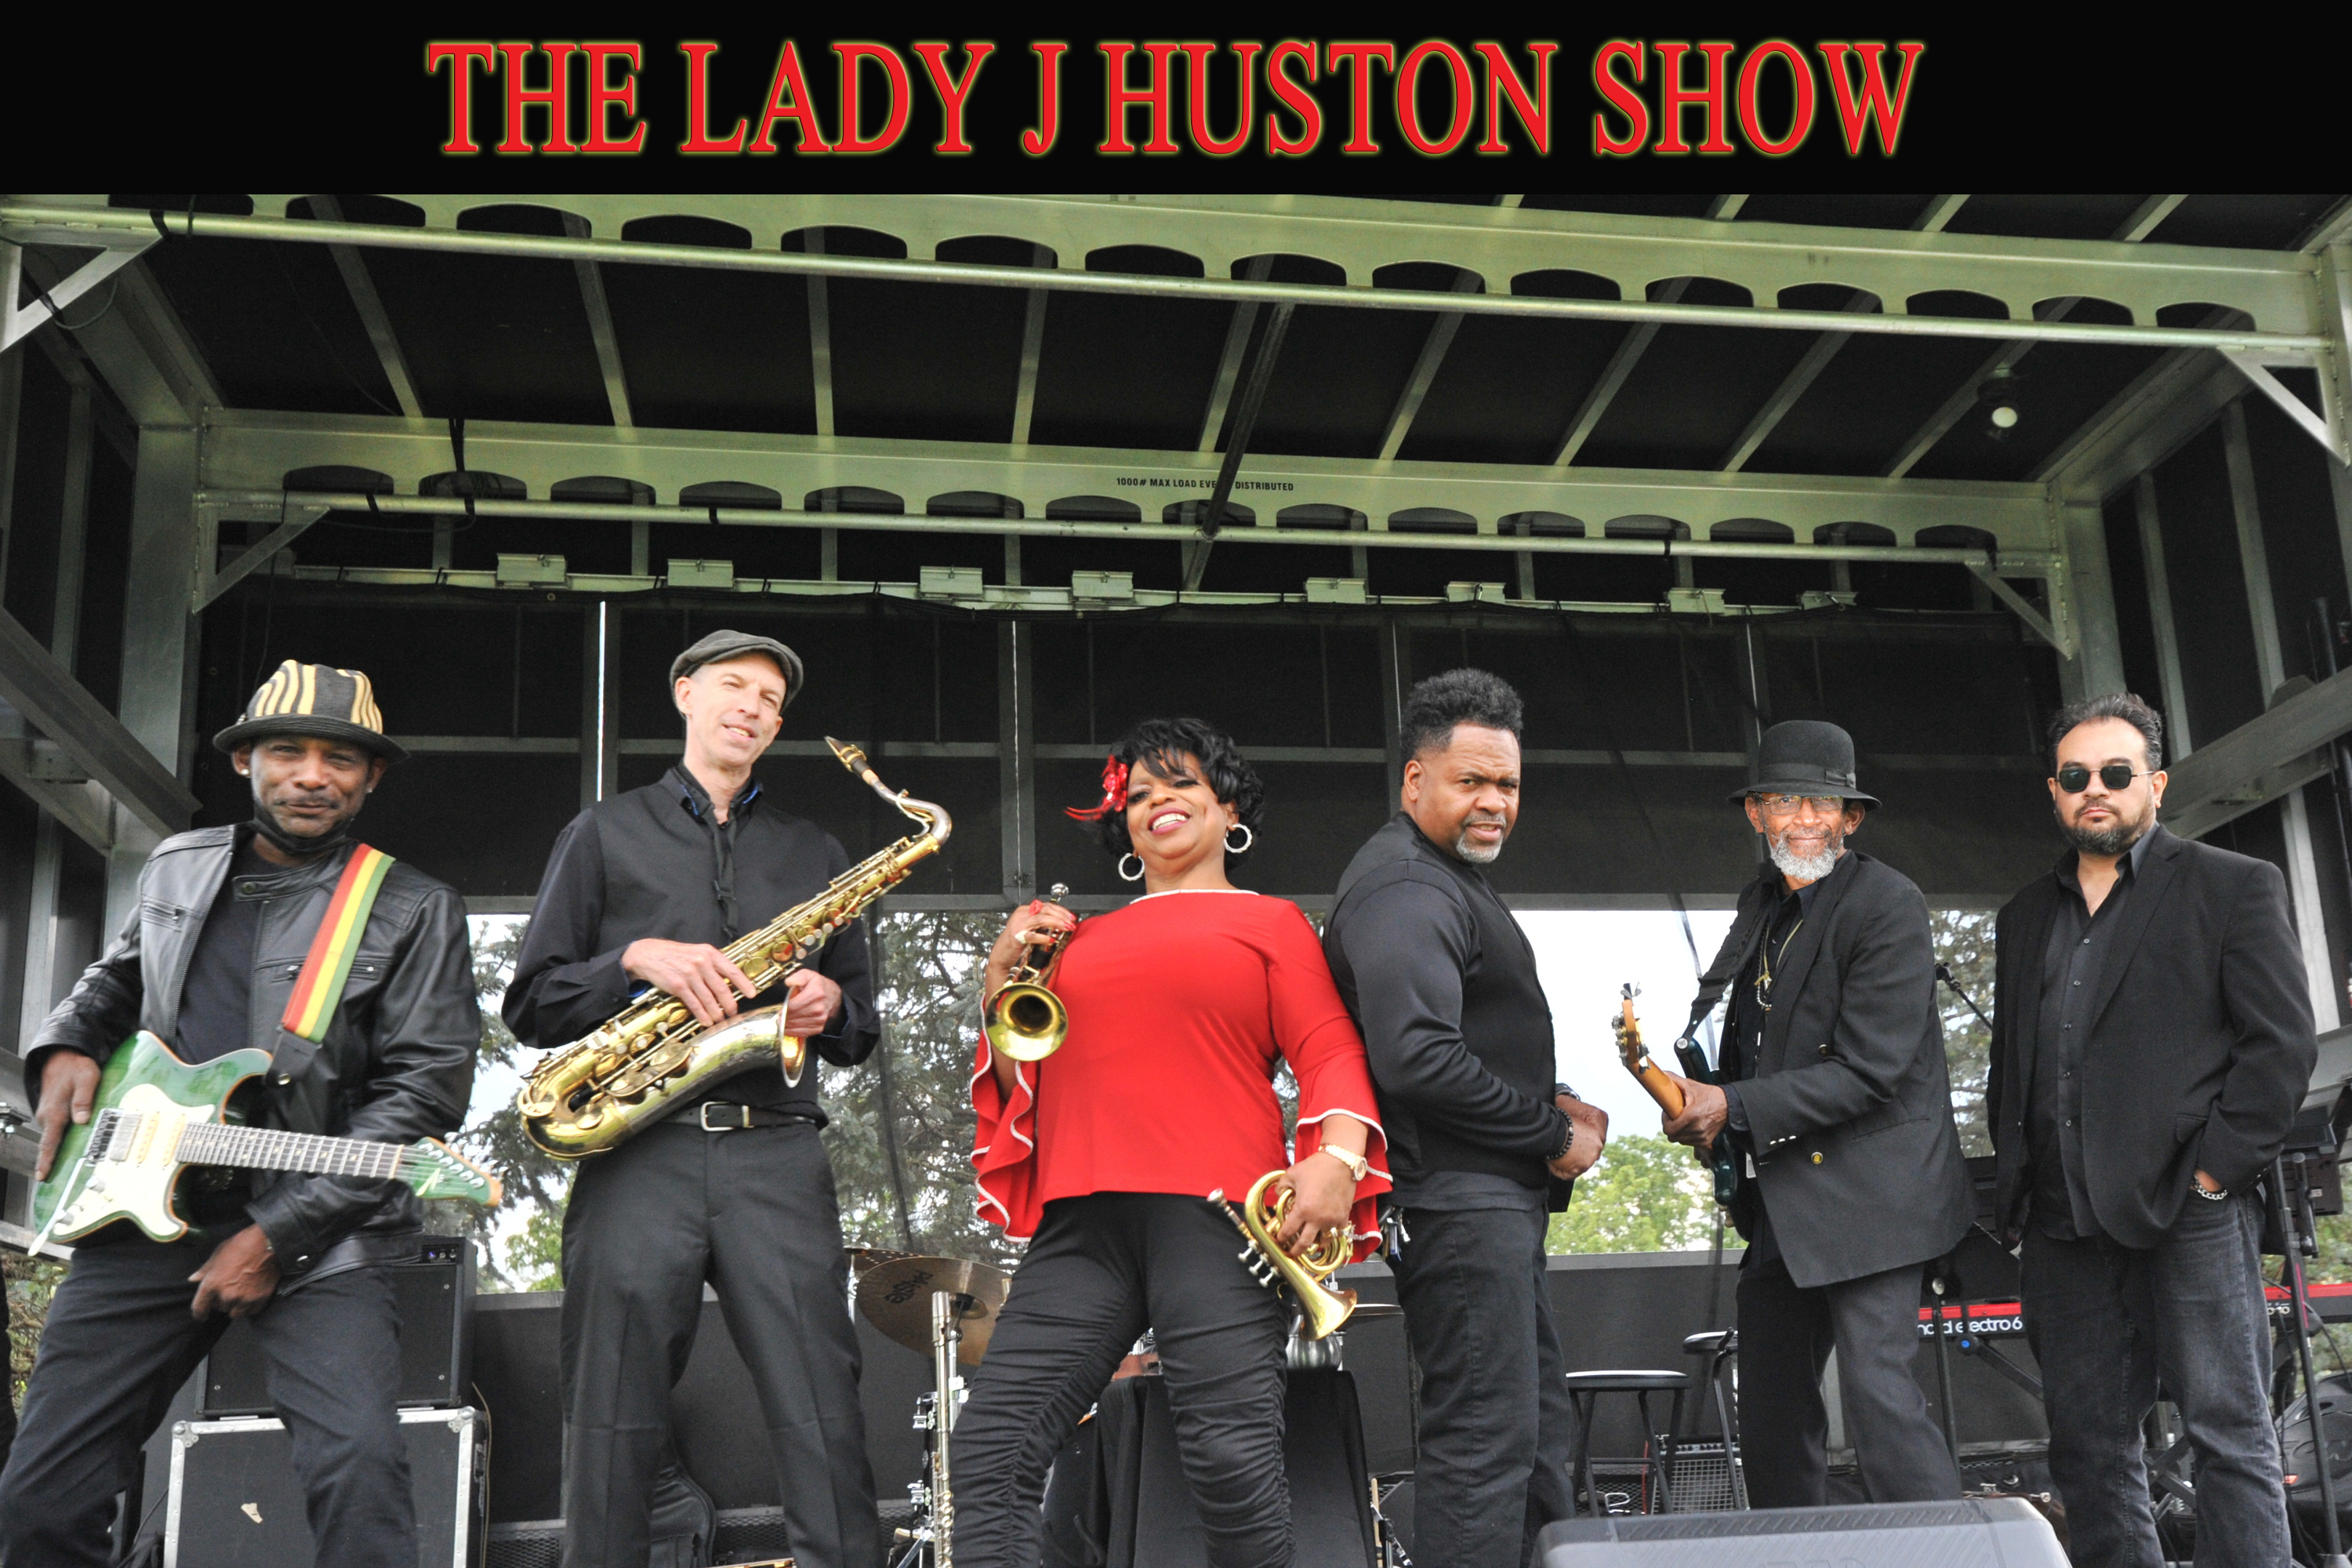 KDHX presents Listen Live featuring The Lady J Huston Show